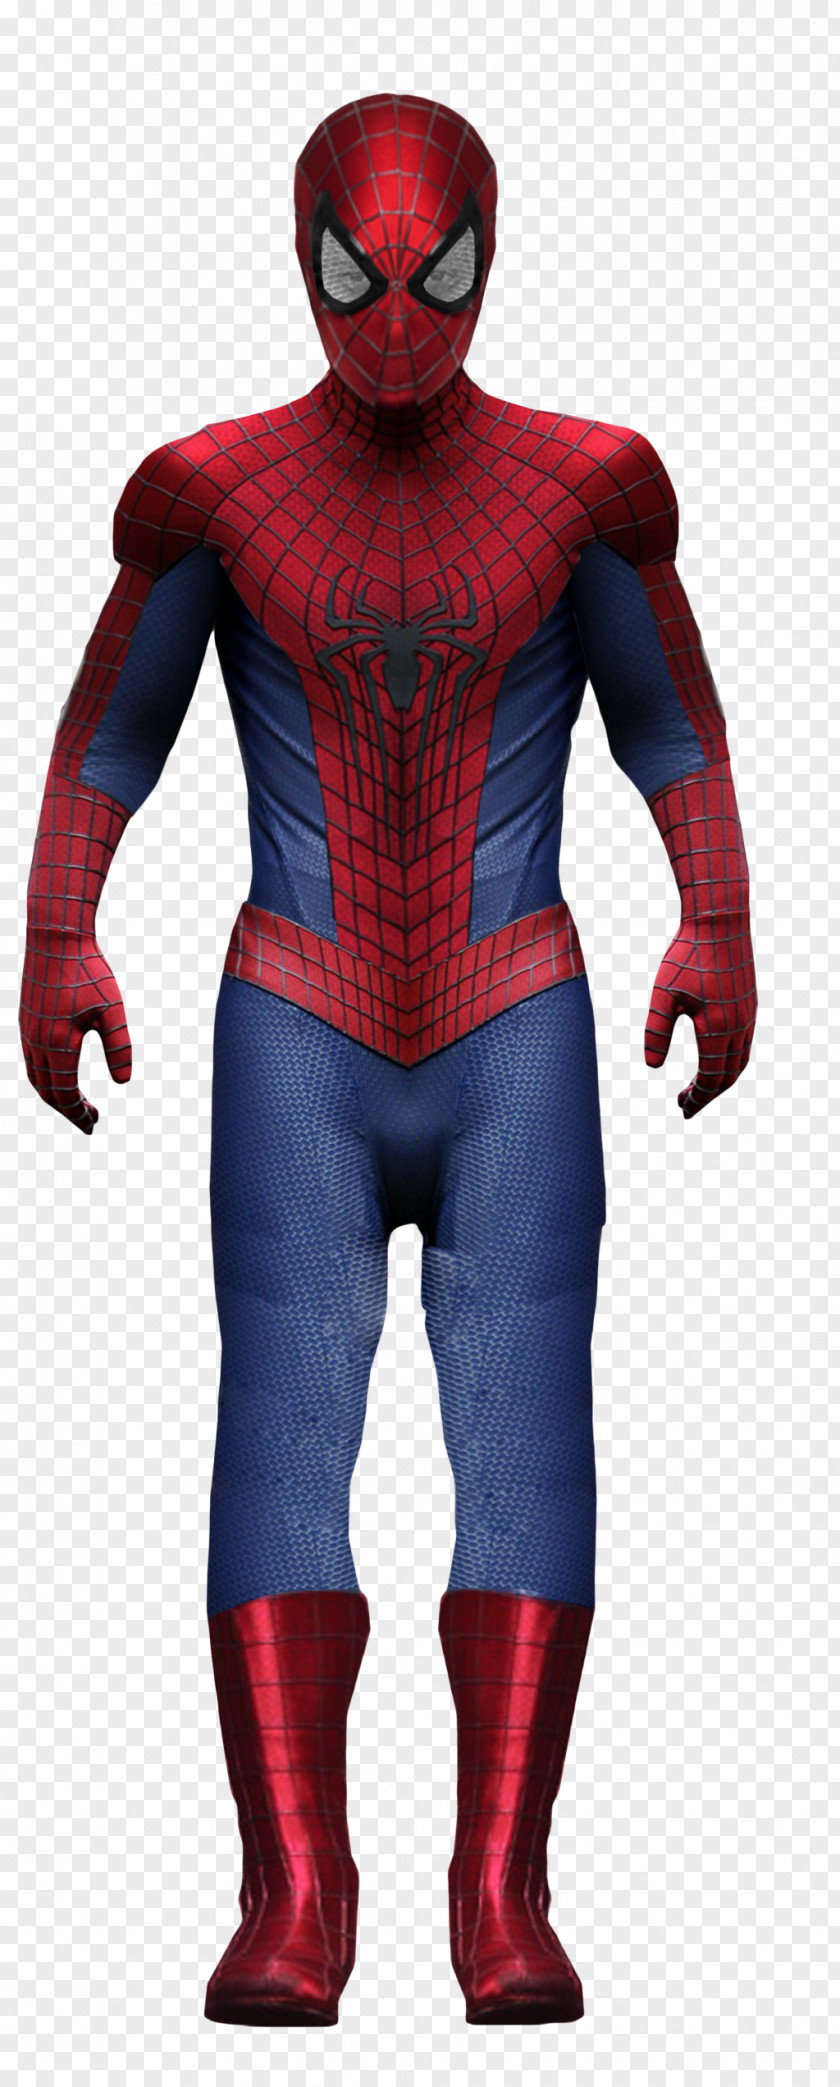 Spiderman Spider-Man: Homecoming Film Series Suit Symbiote Mask PNG